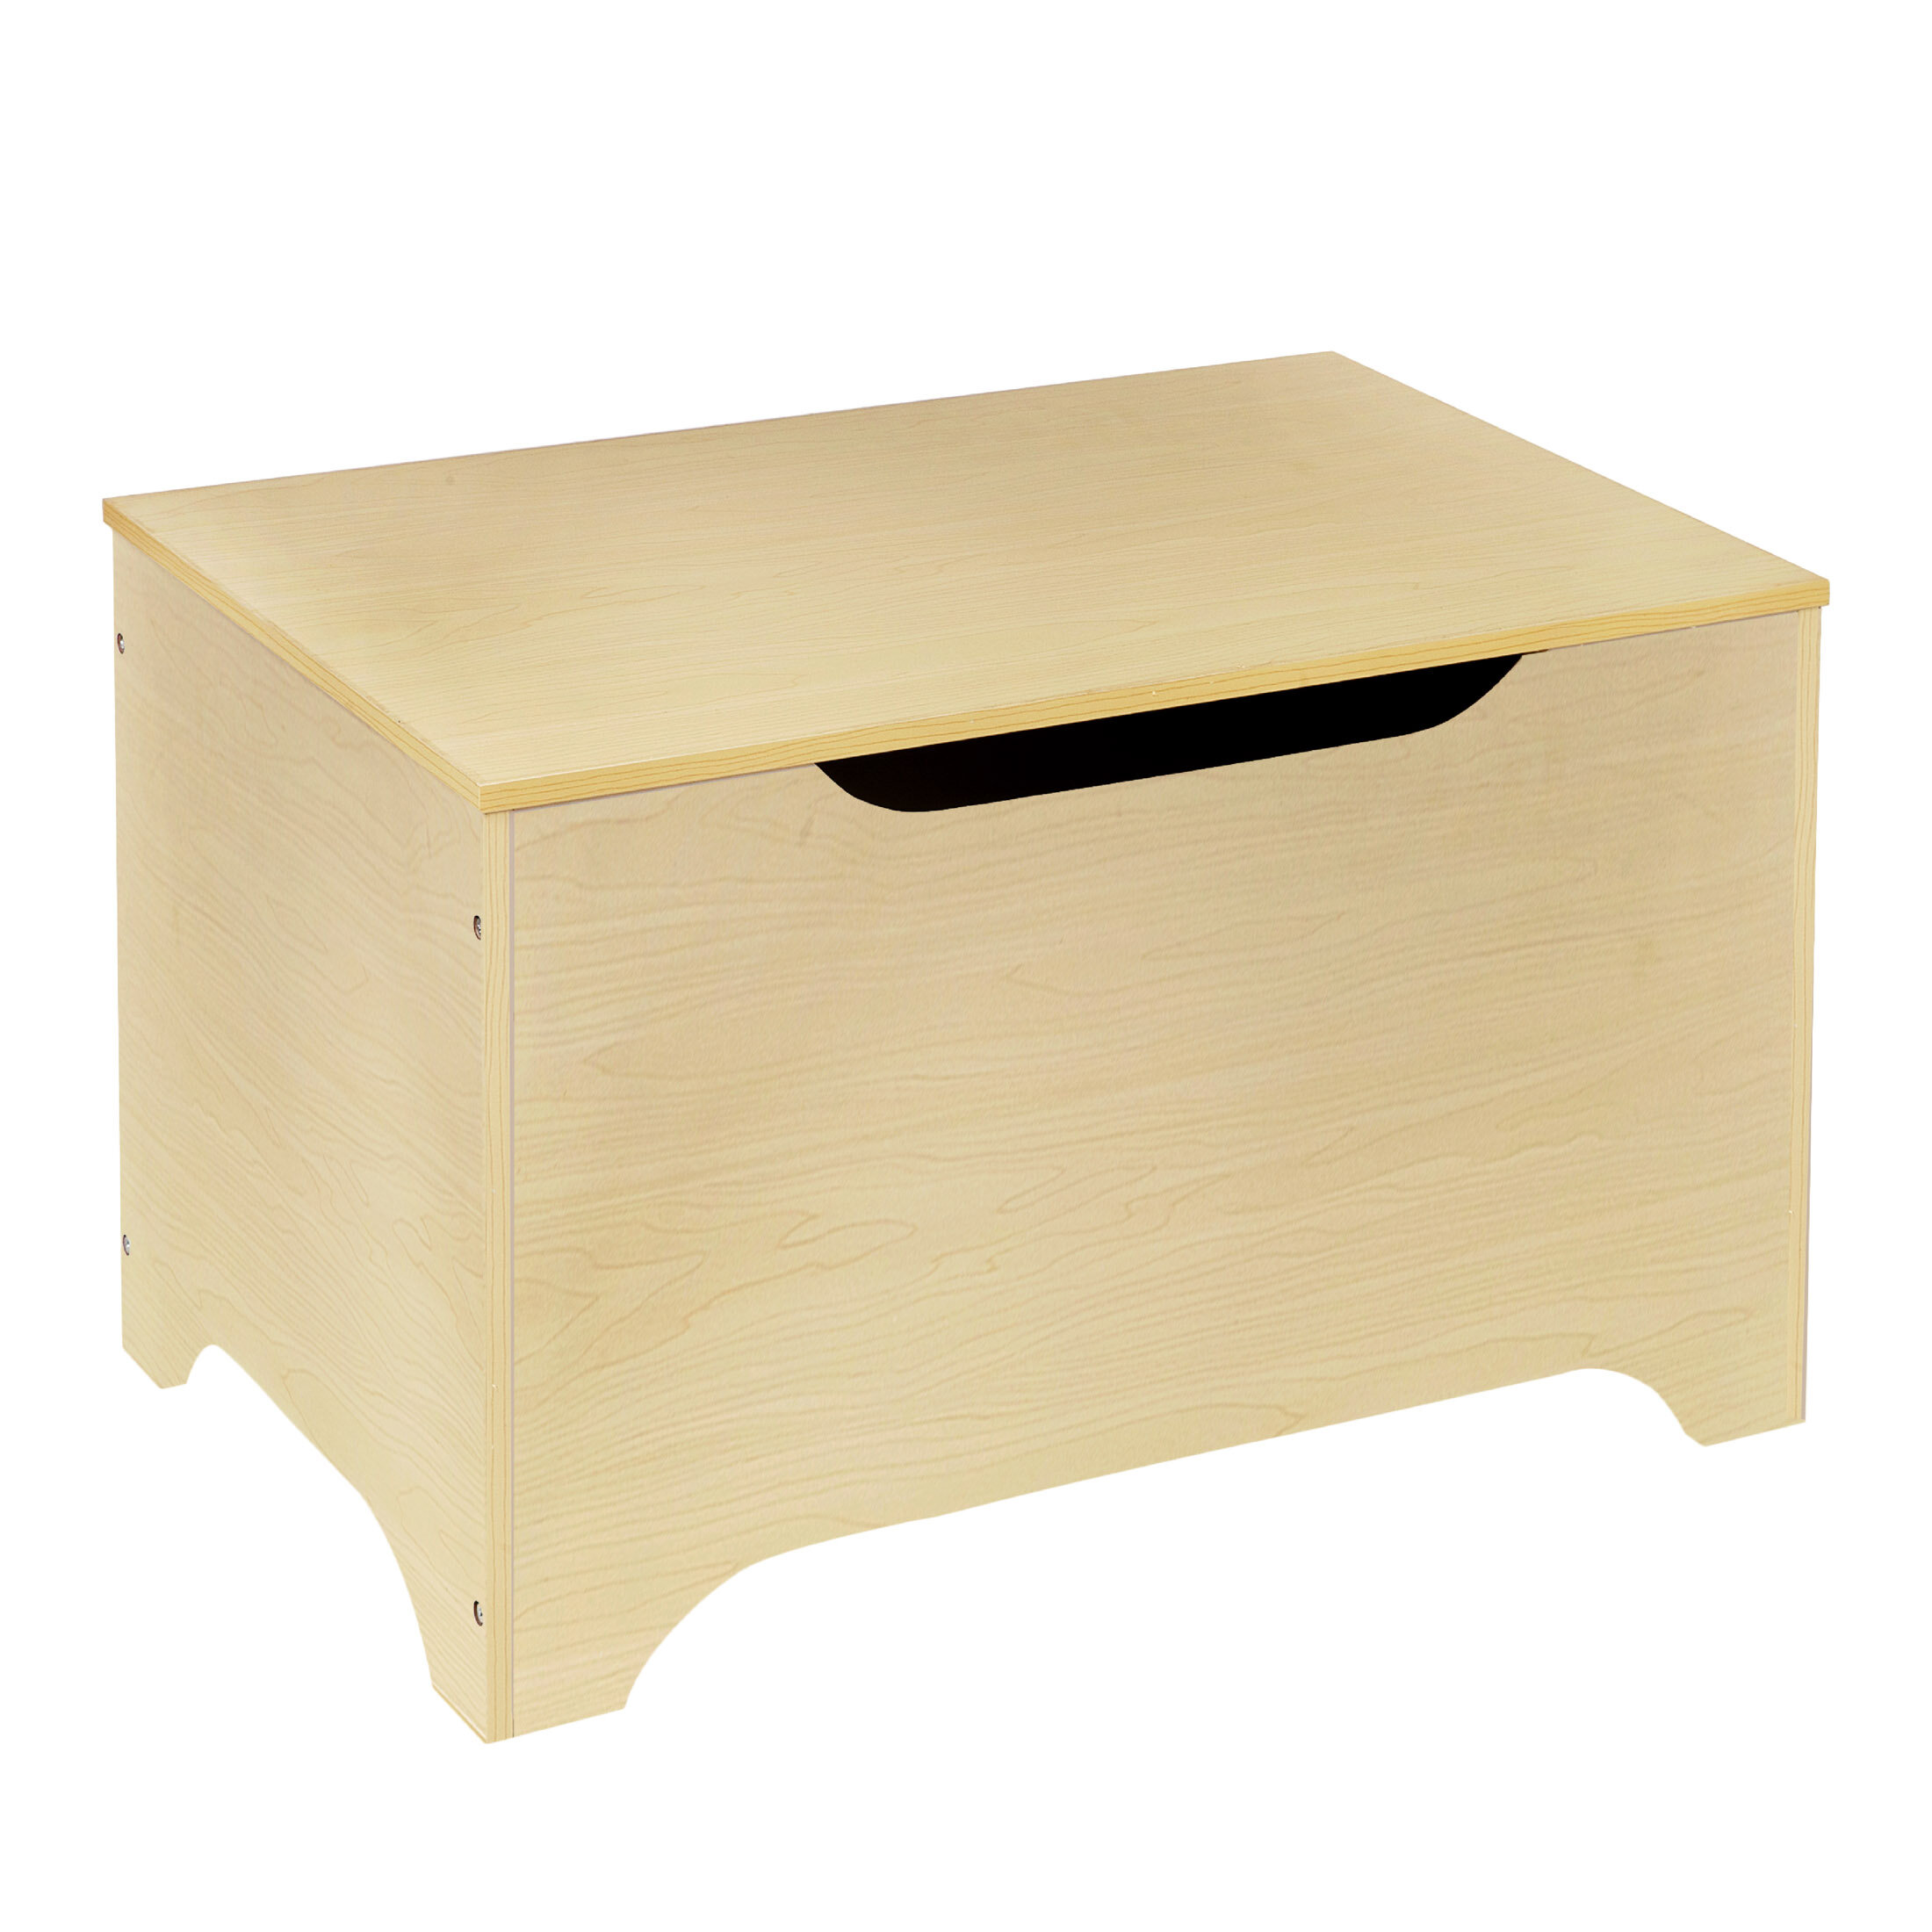 Large Toy Box by Nilo-Toys